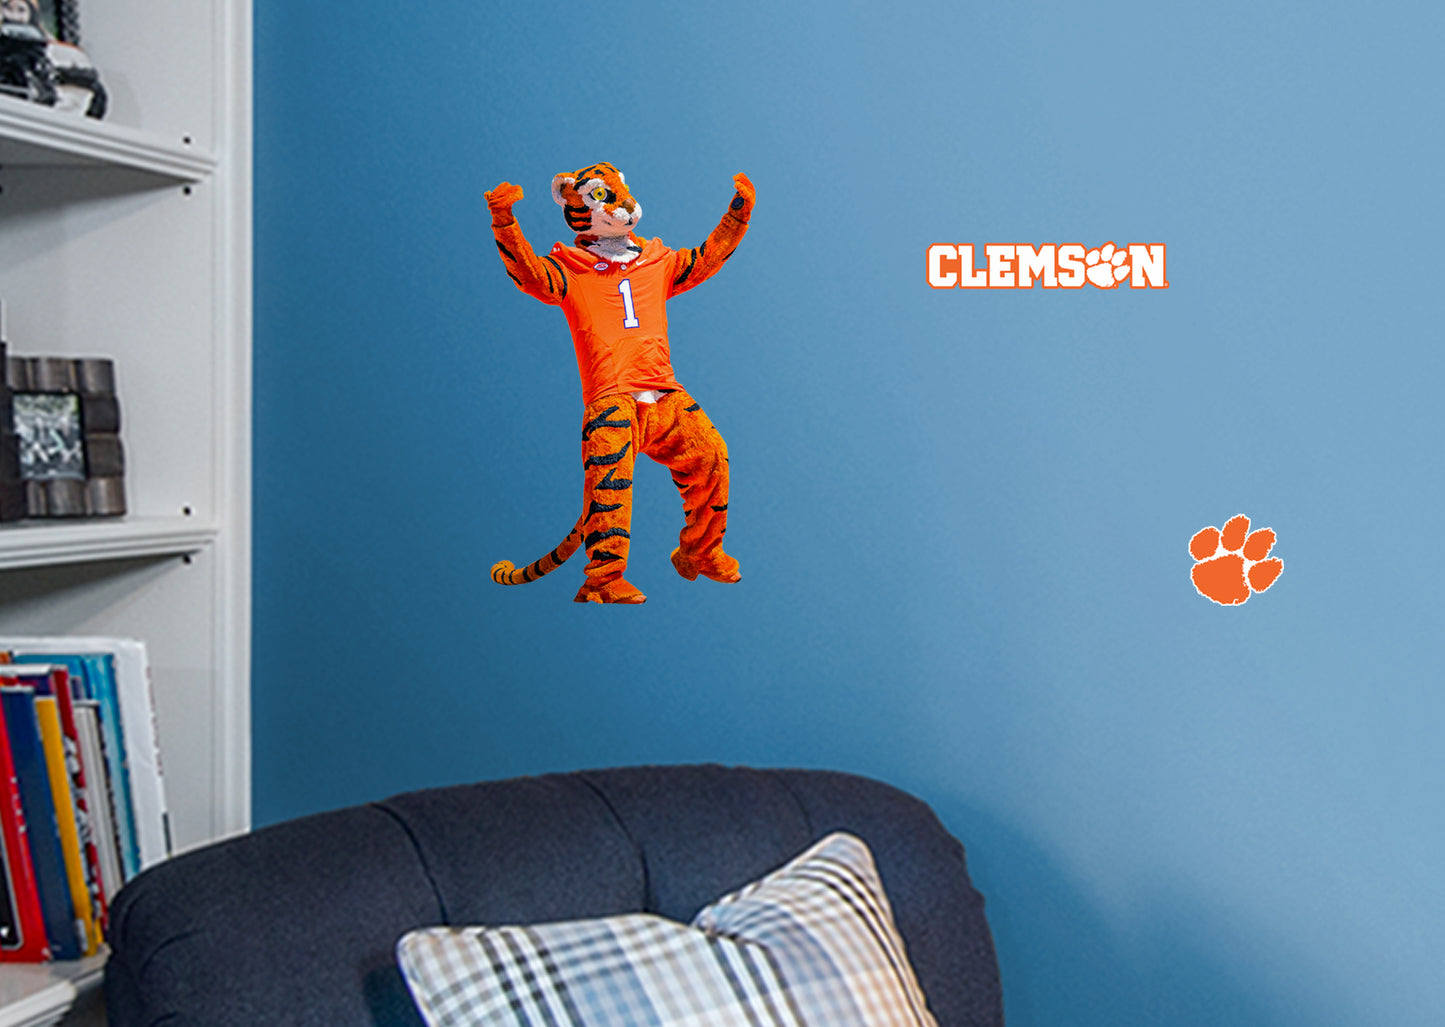 Clemson Tigers: The Tiger  Mascot        - Officially Licensed NCAA Removable Wall   Adhesive Decal